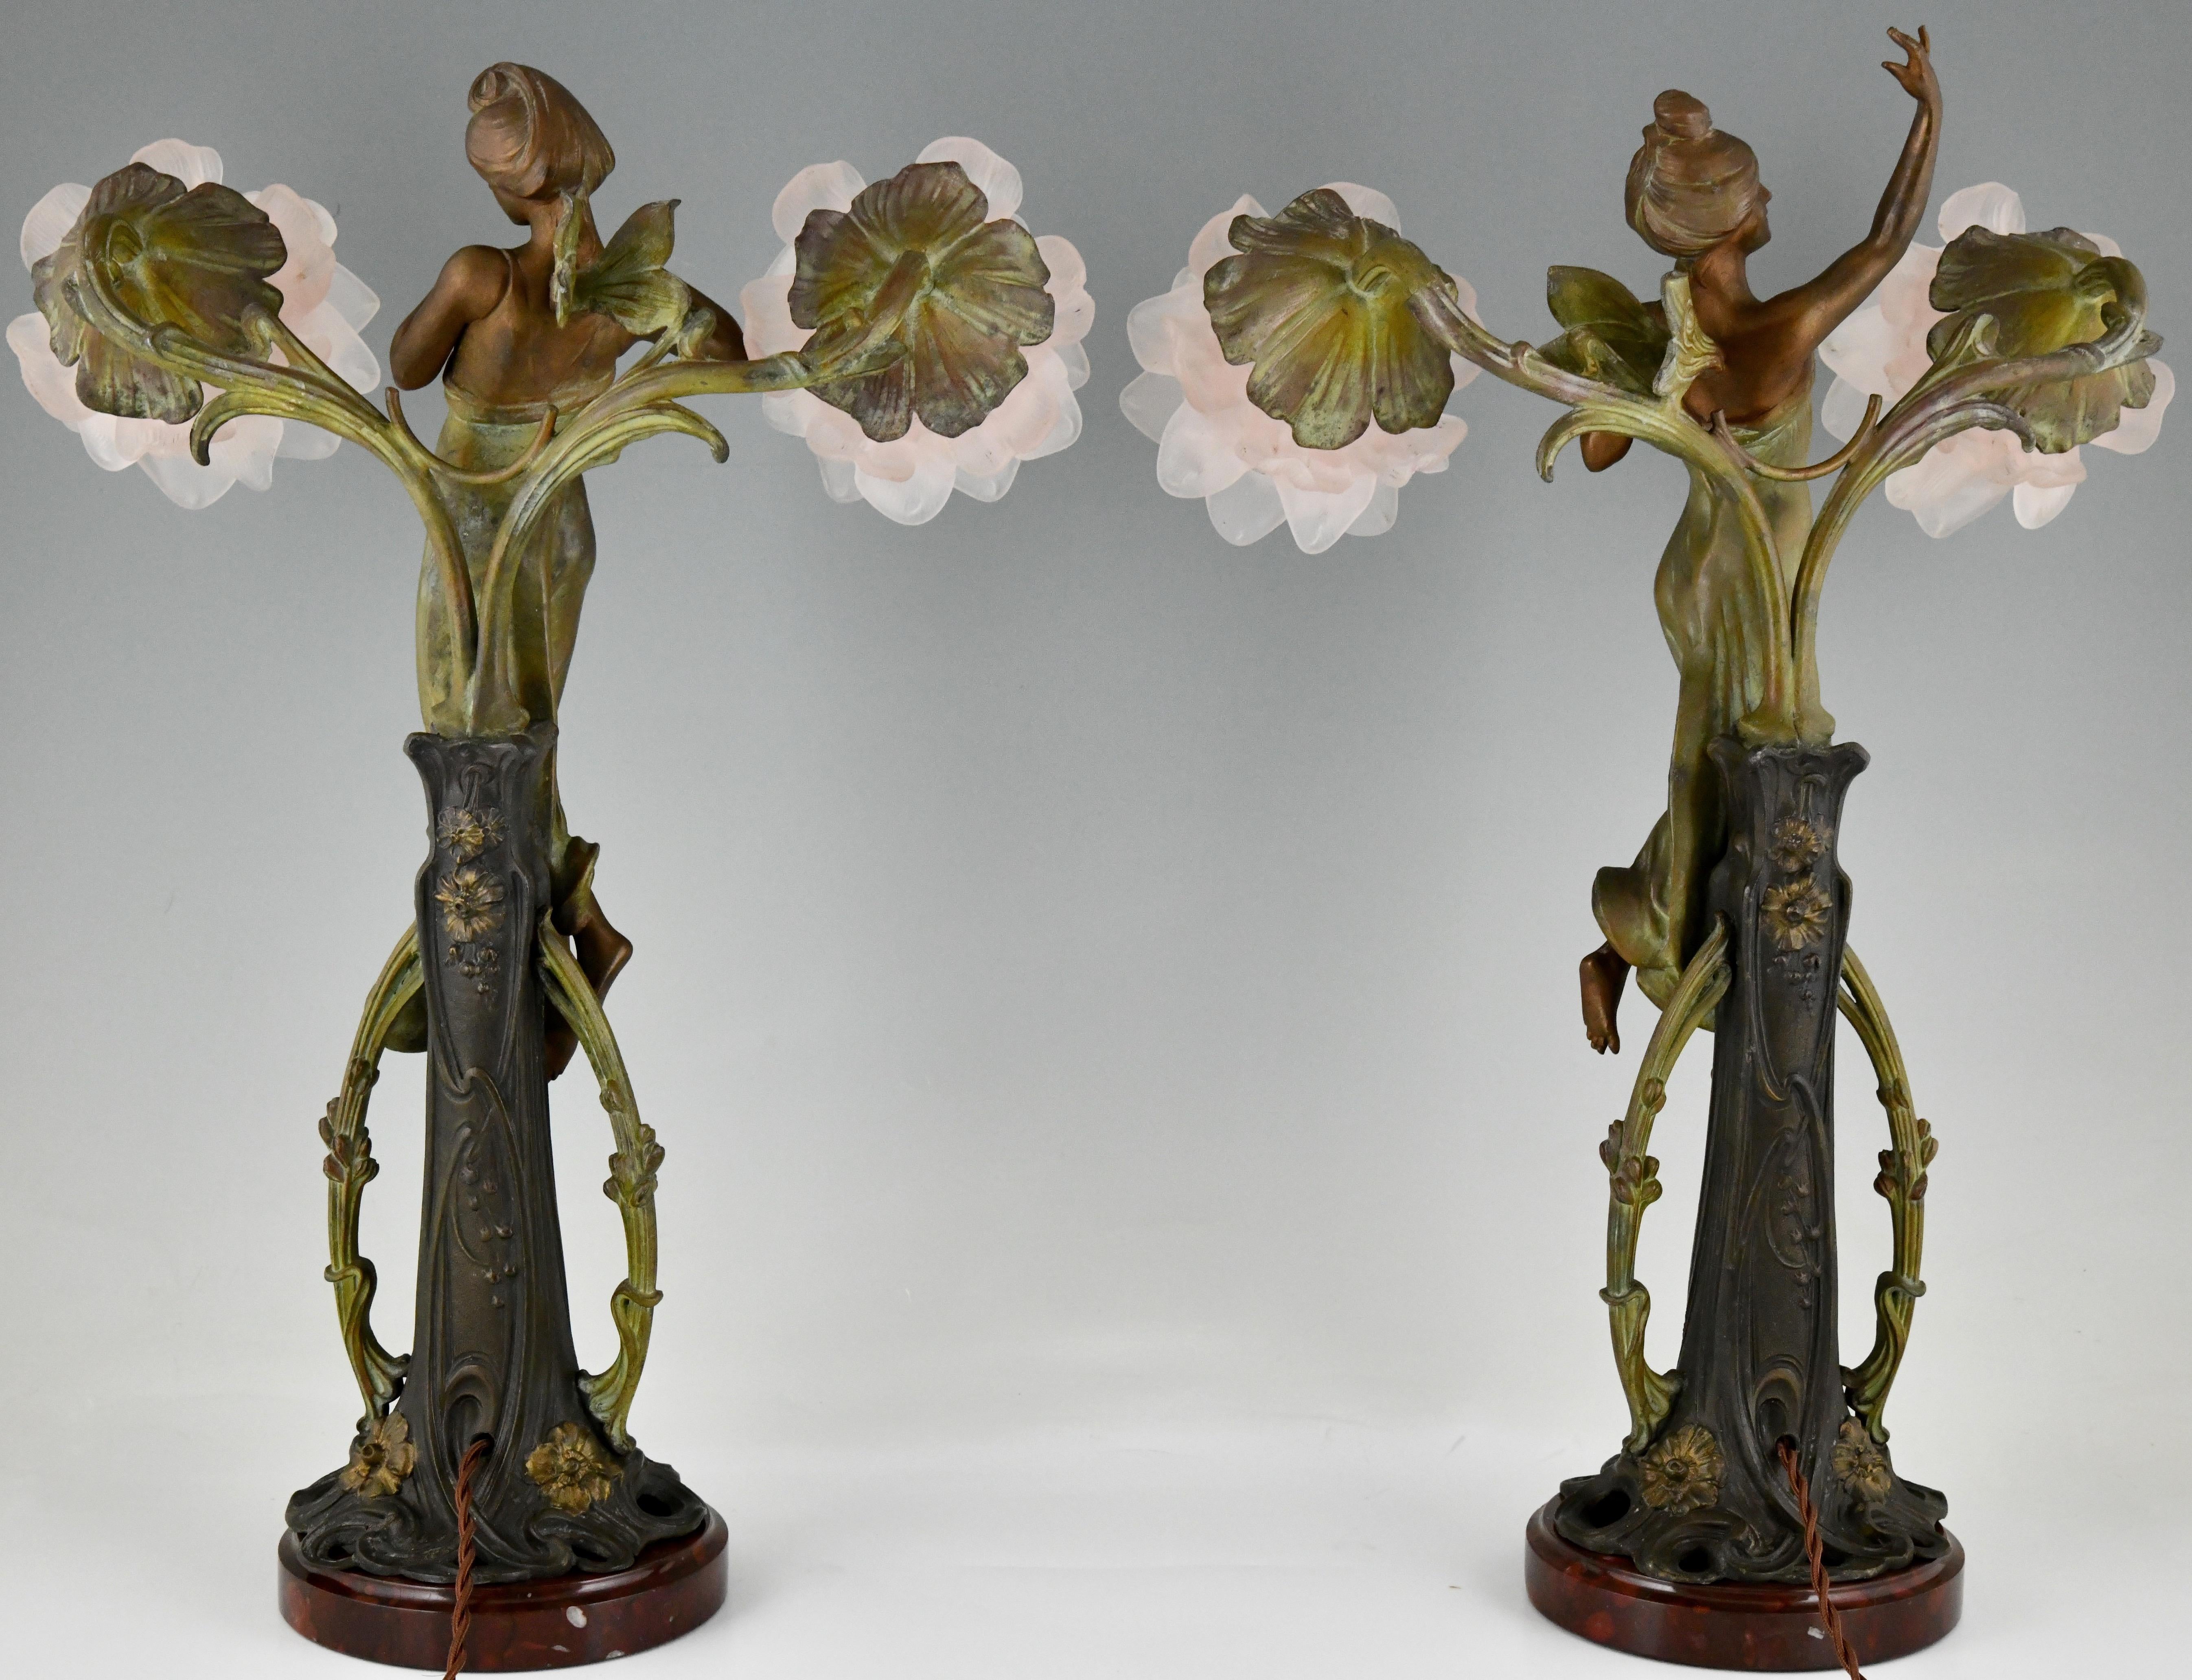 Patinated Pair of Art Nouveau Lamps Ladies and Flowers by Bonnefond, France, 1900